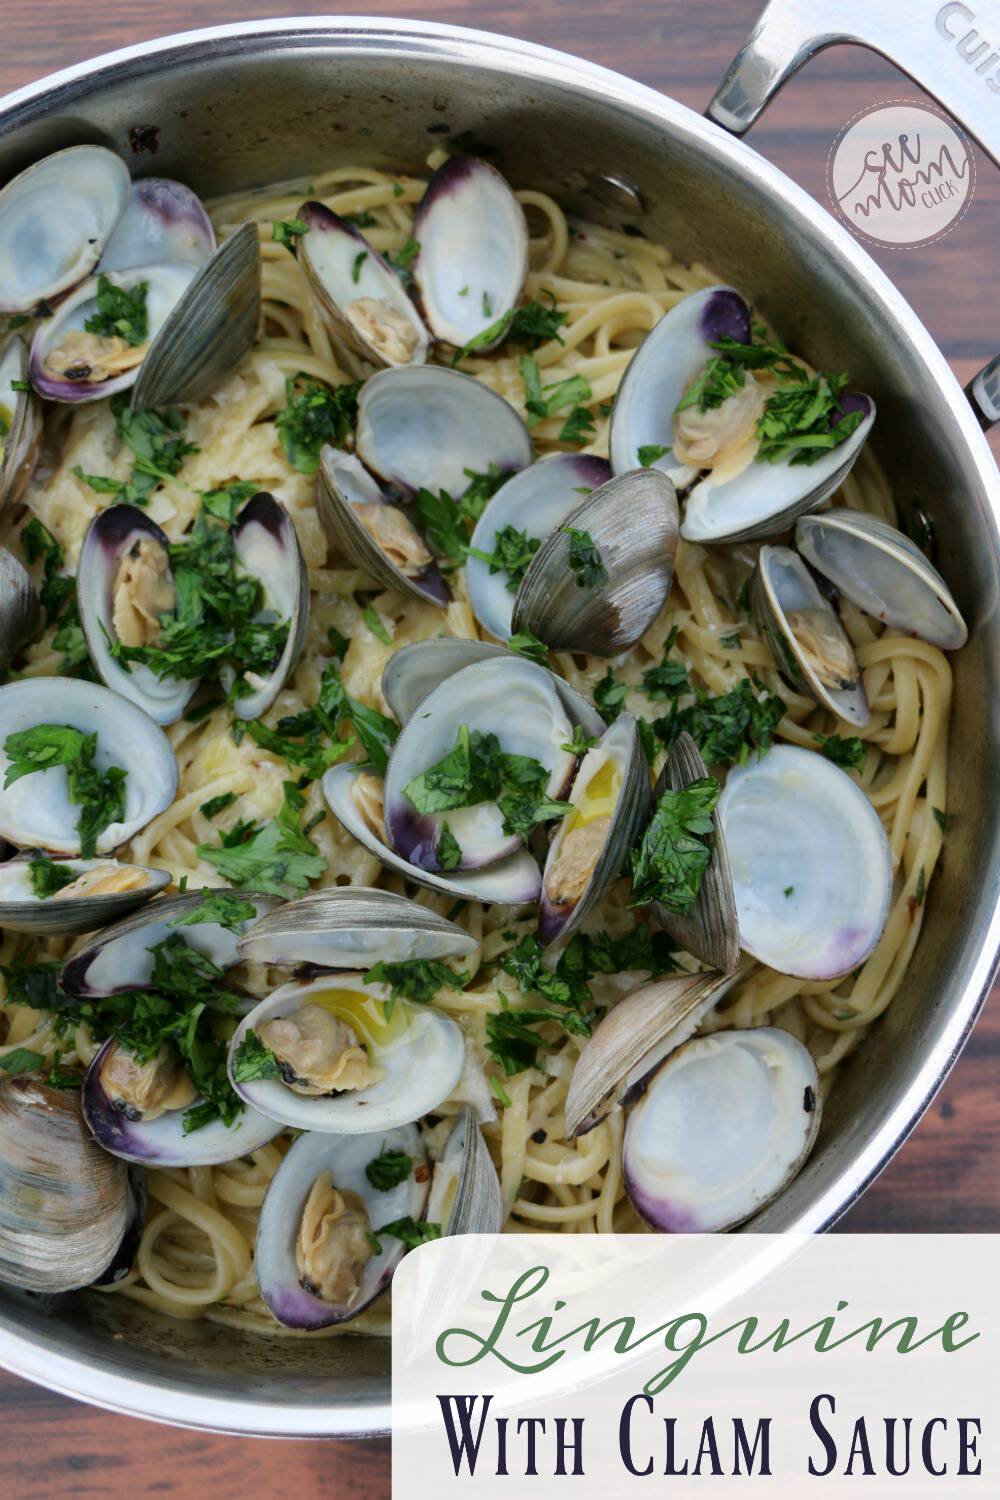 This Linguine and Clam Sauce Recipe is so delicious and full of flavor with fresh clams and just a pinch of heat. Our new favorite pasta recipe!